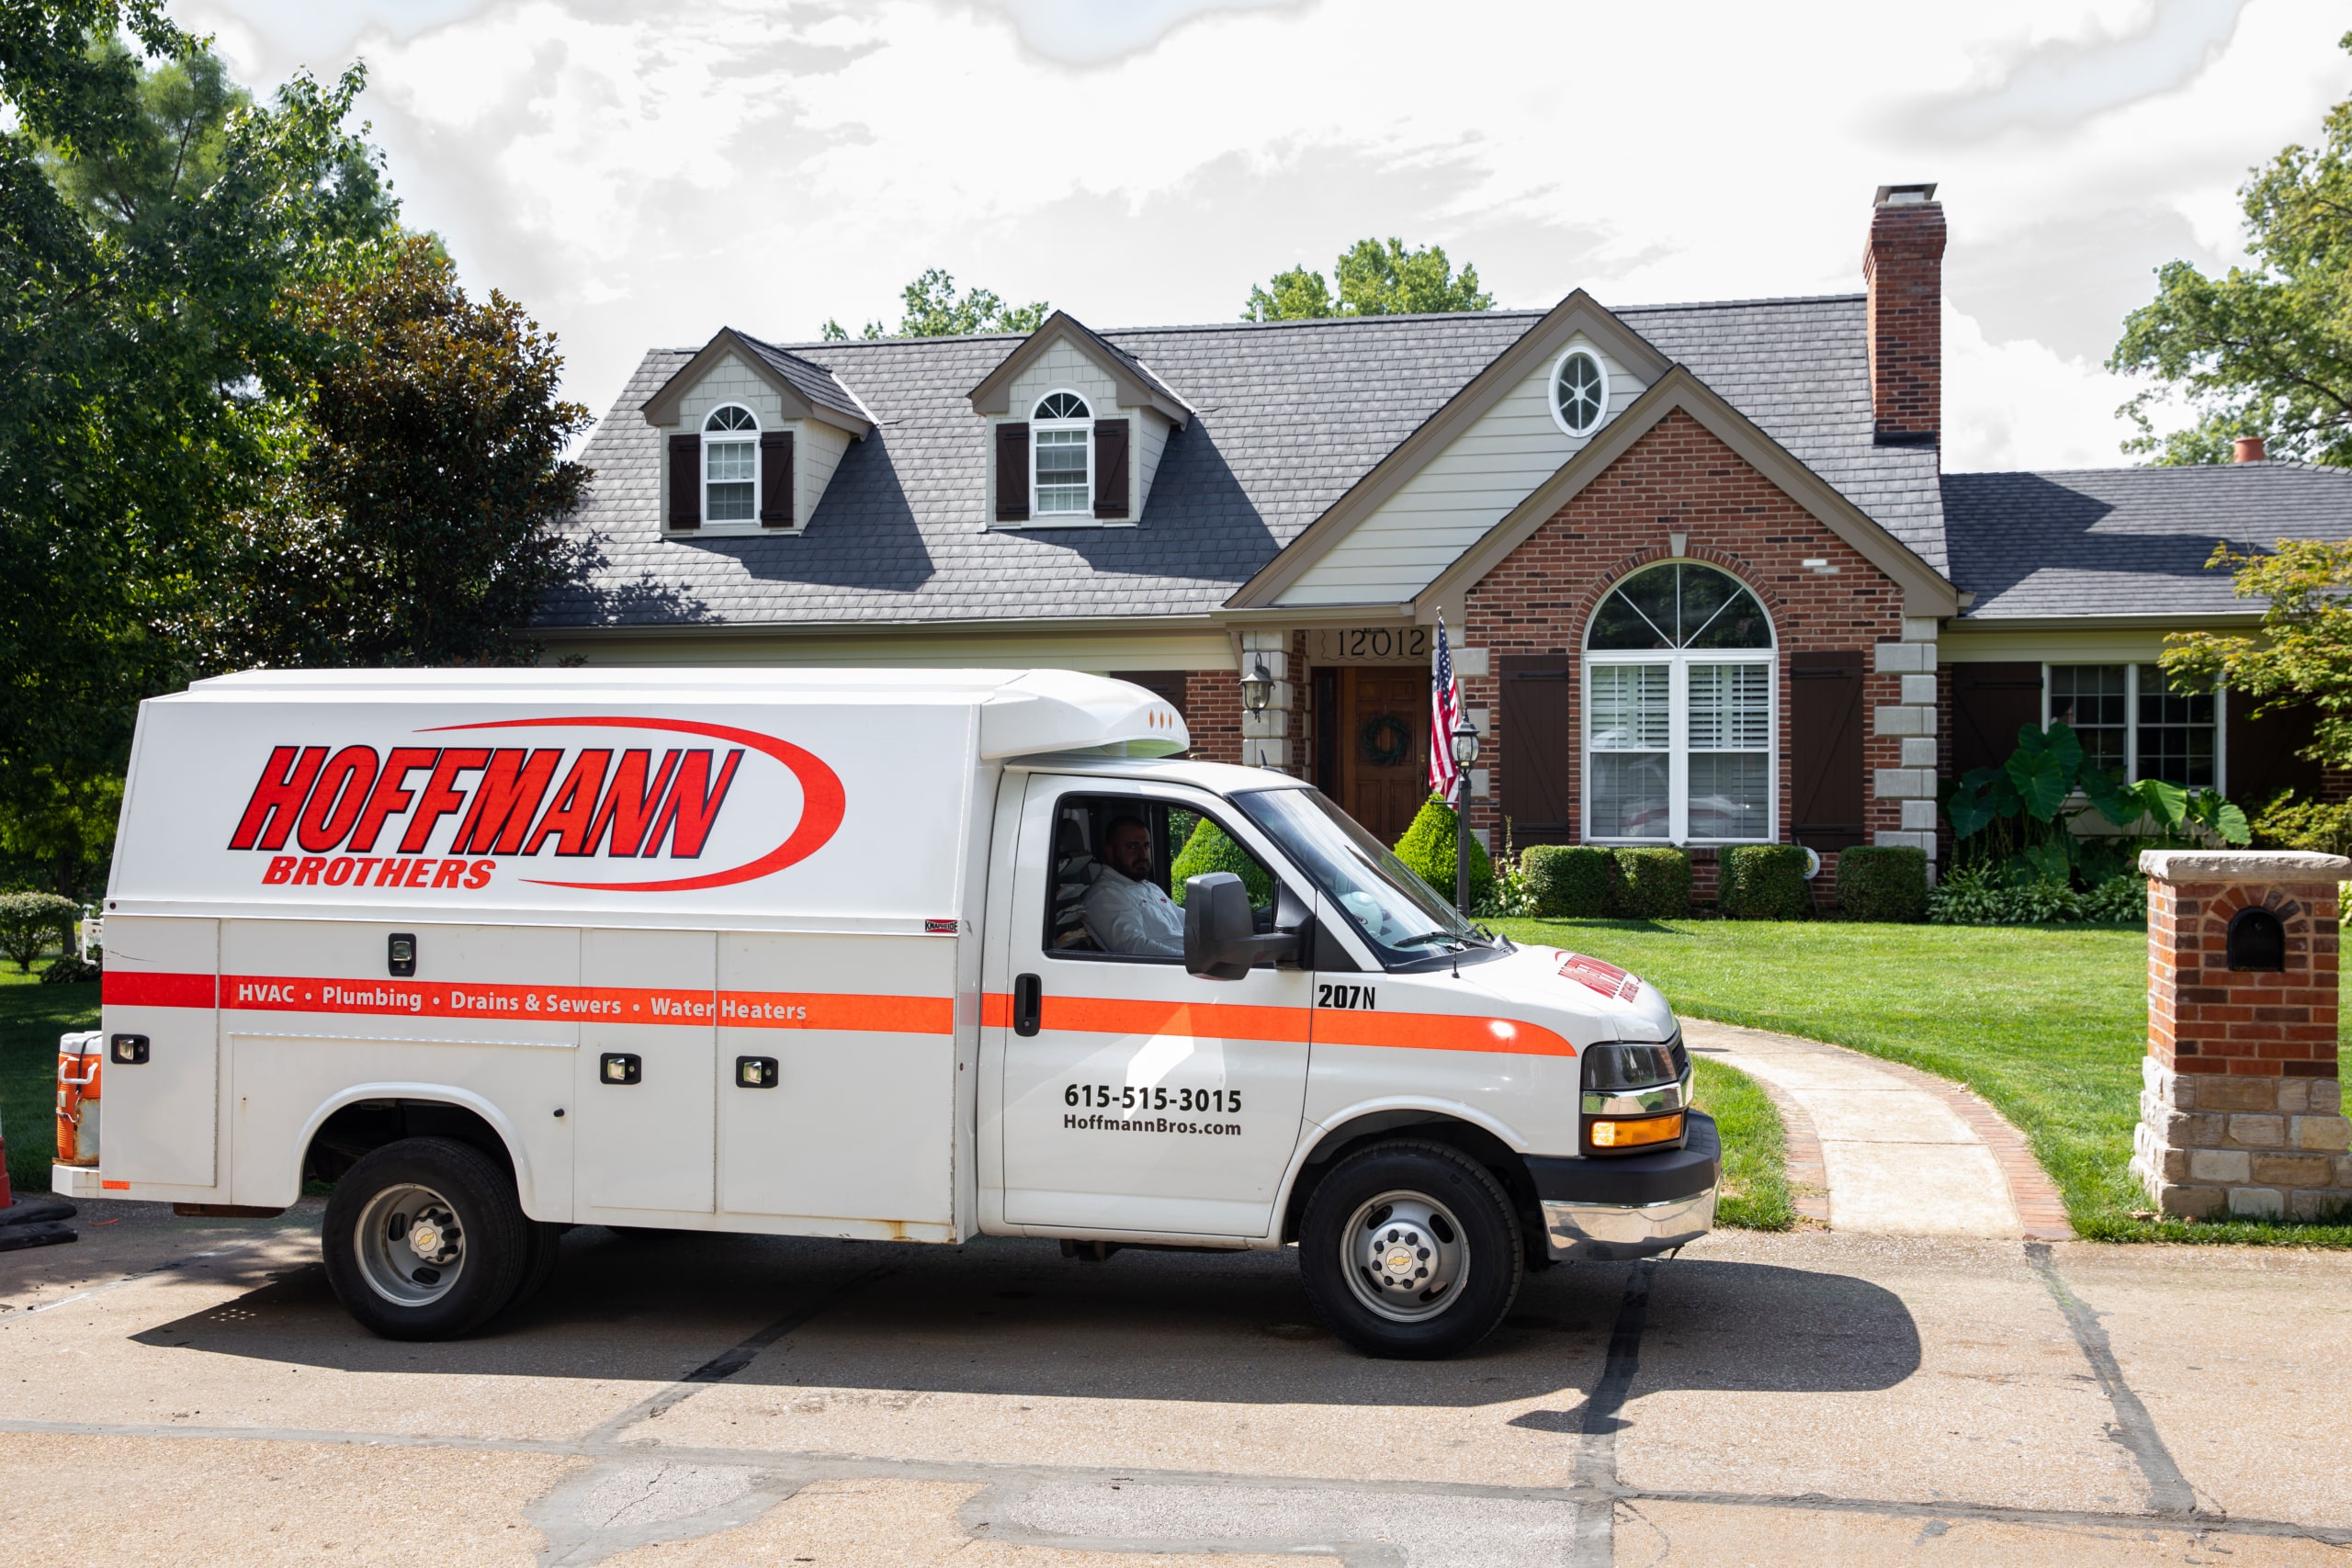 hoffmann brothers truck parking in front of house in nashville to install electrical surfaces